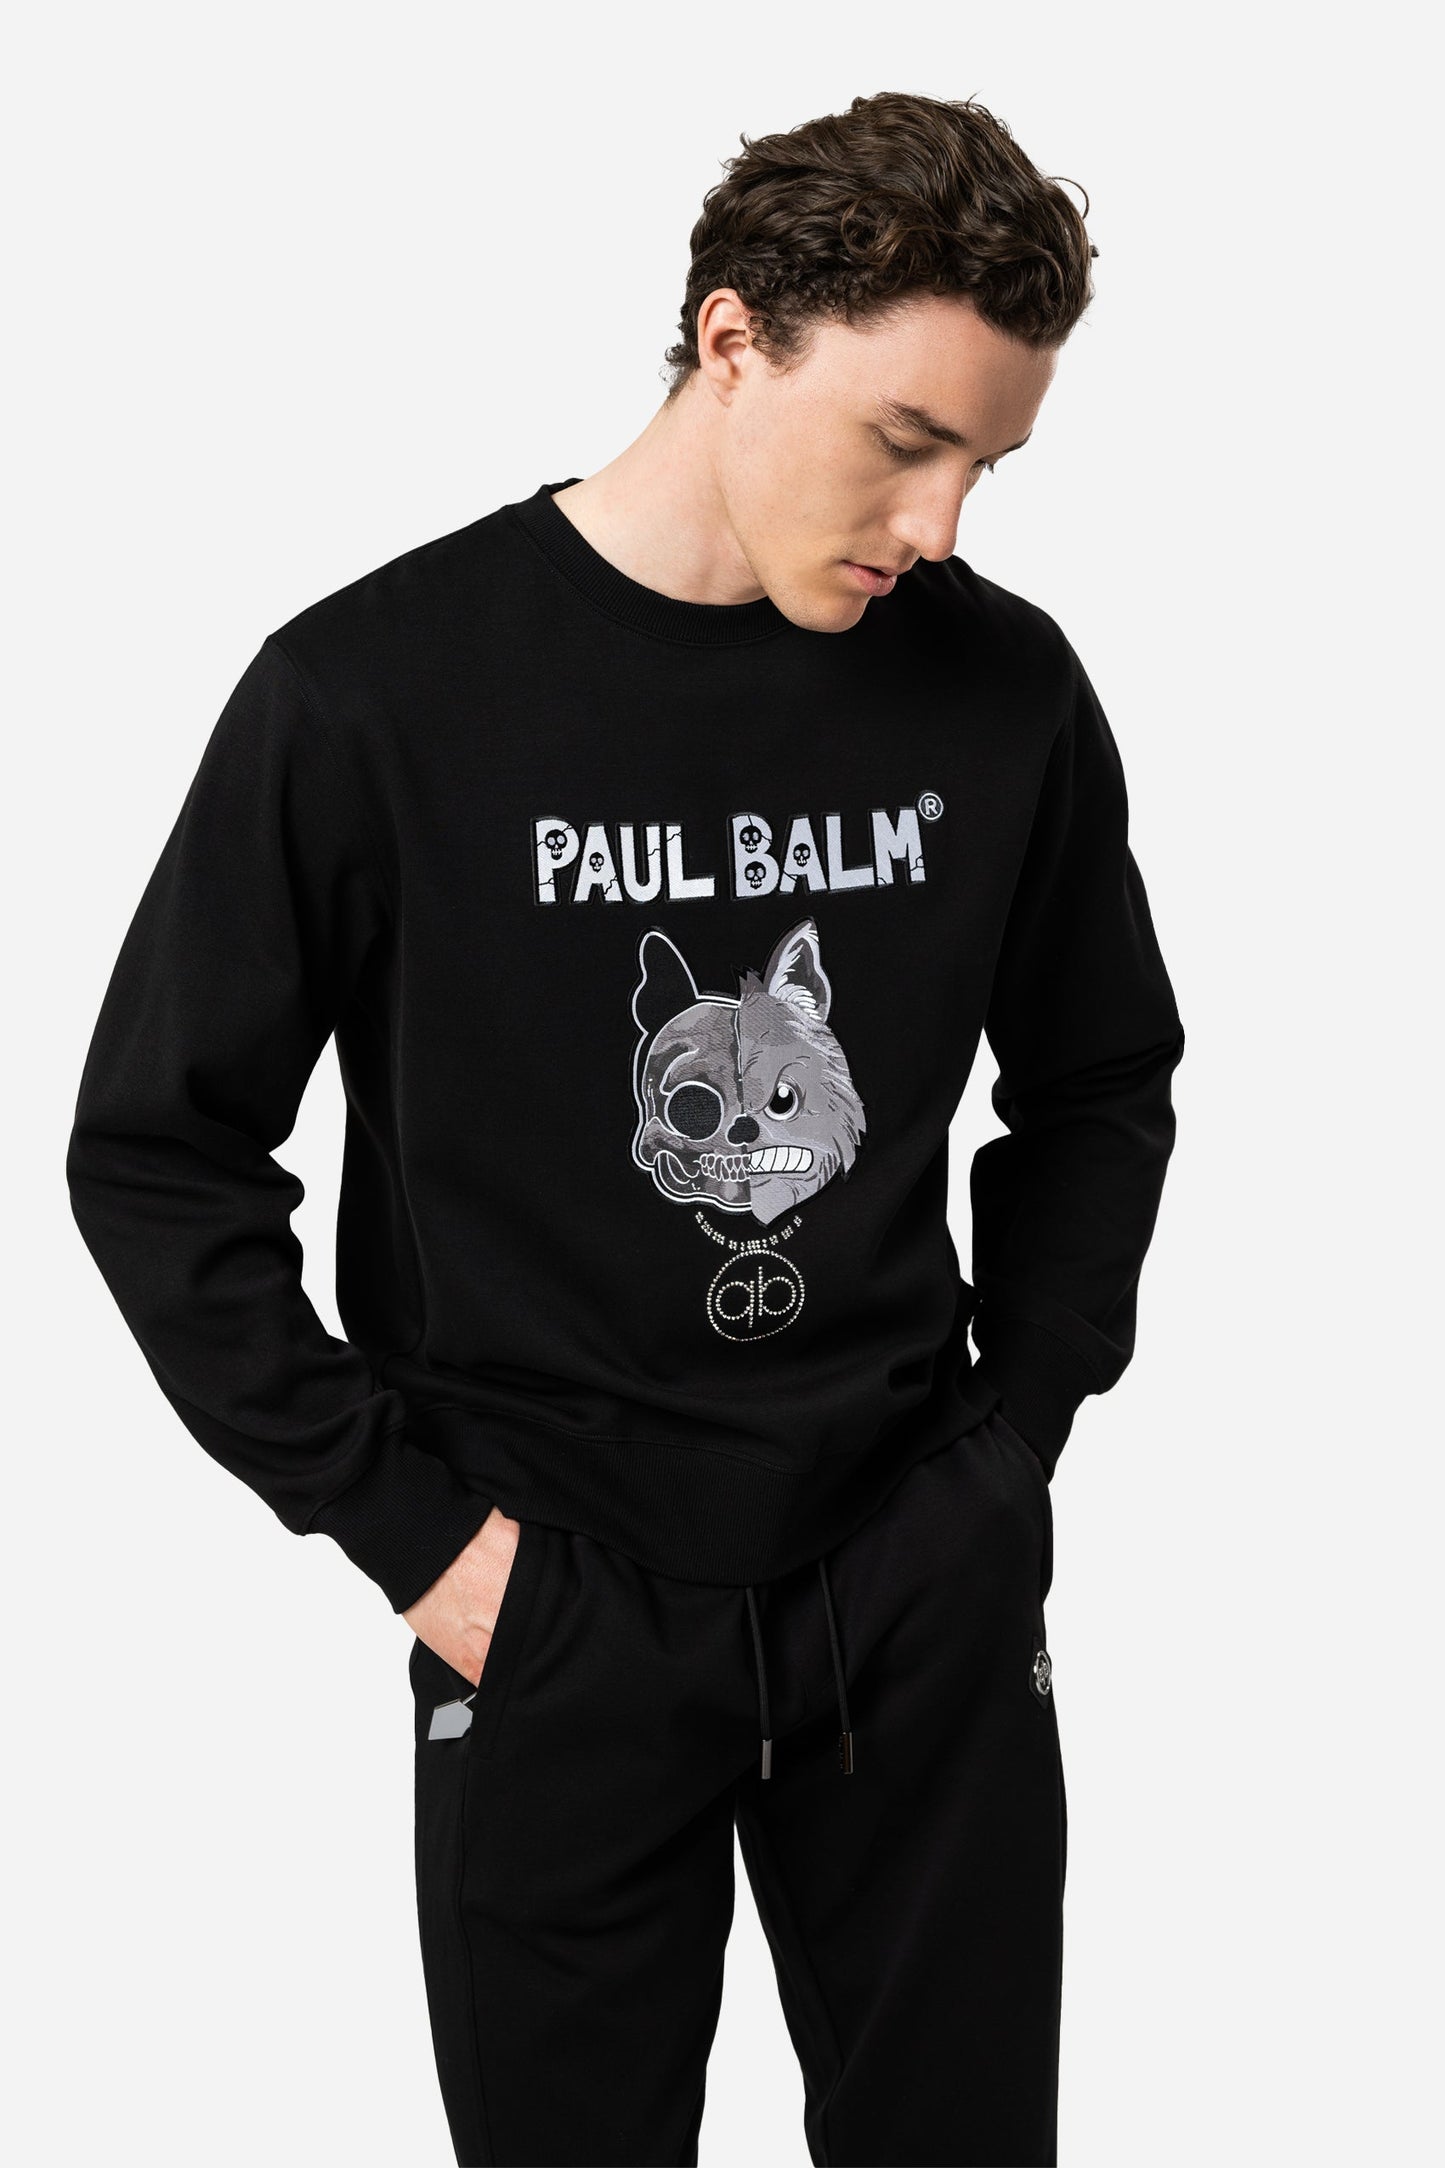 Scull Embroidery Sweatshirt - Limited to 300